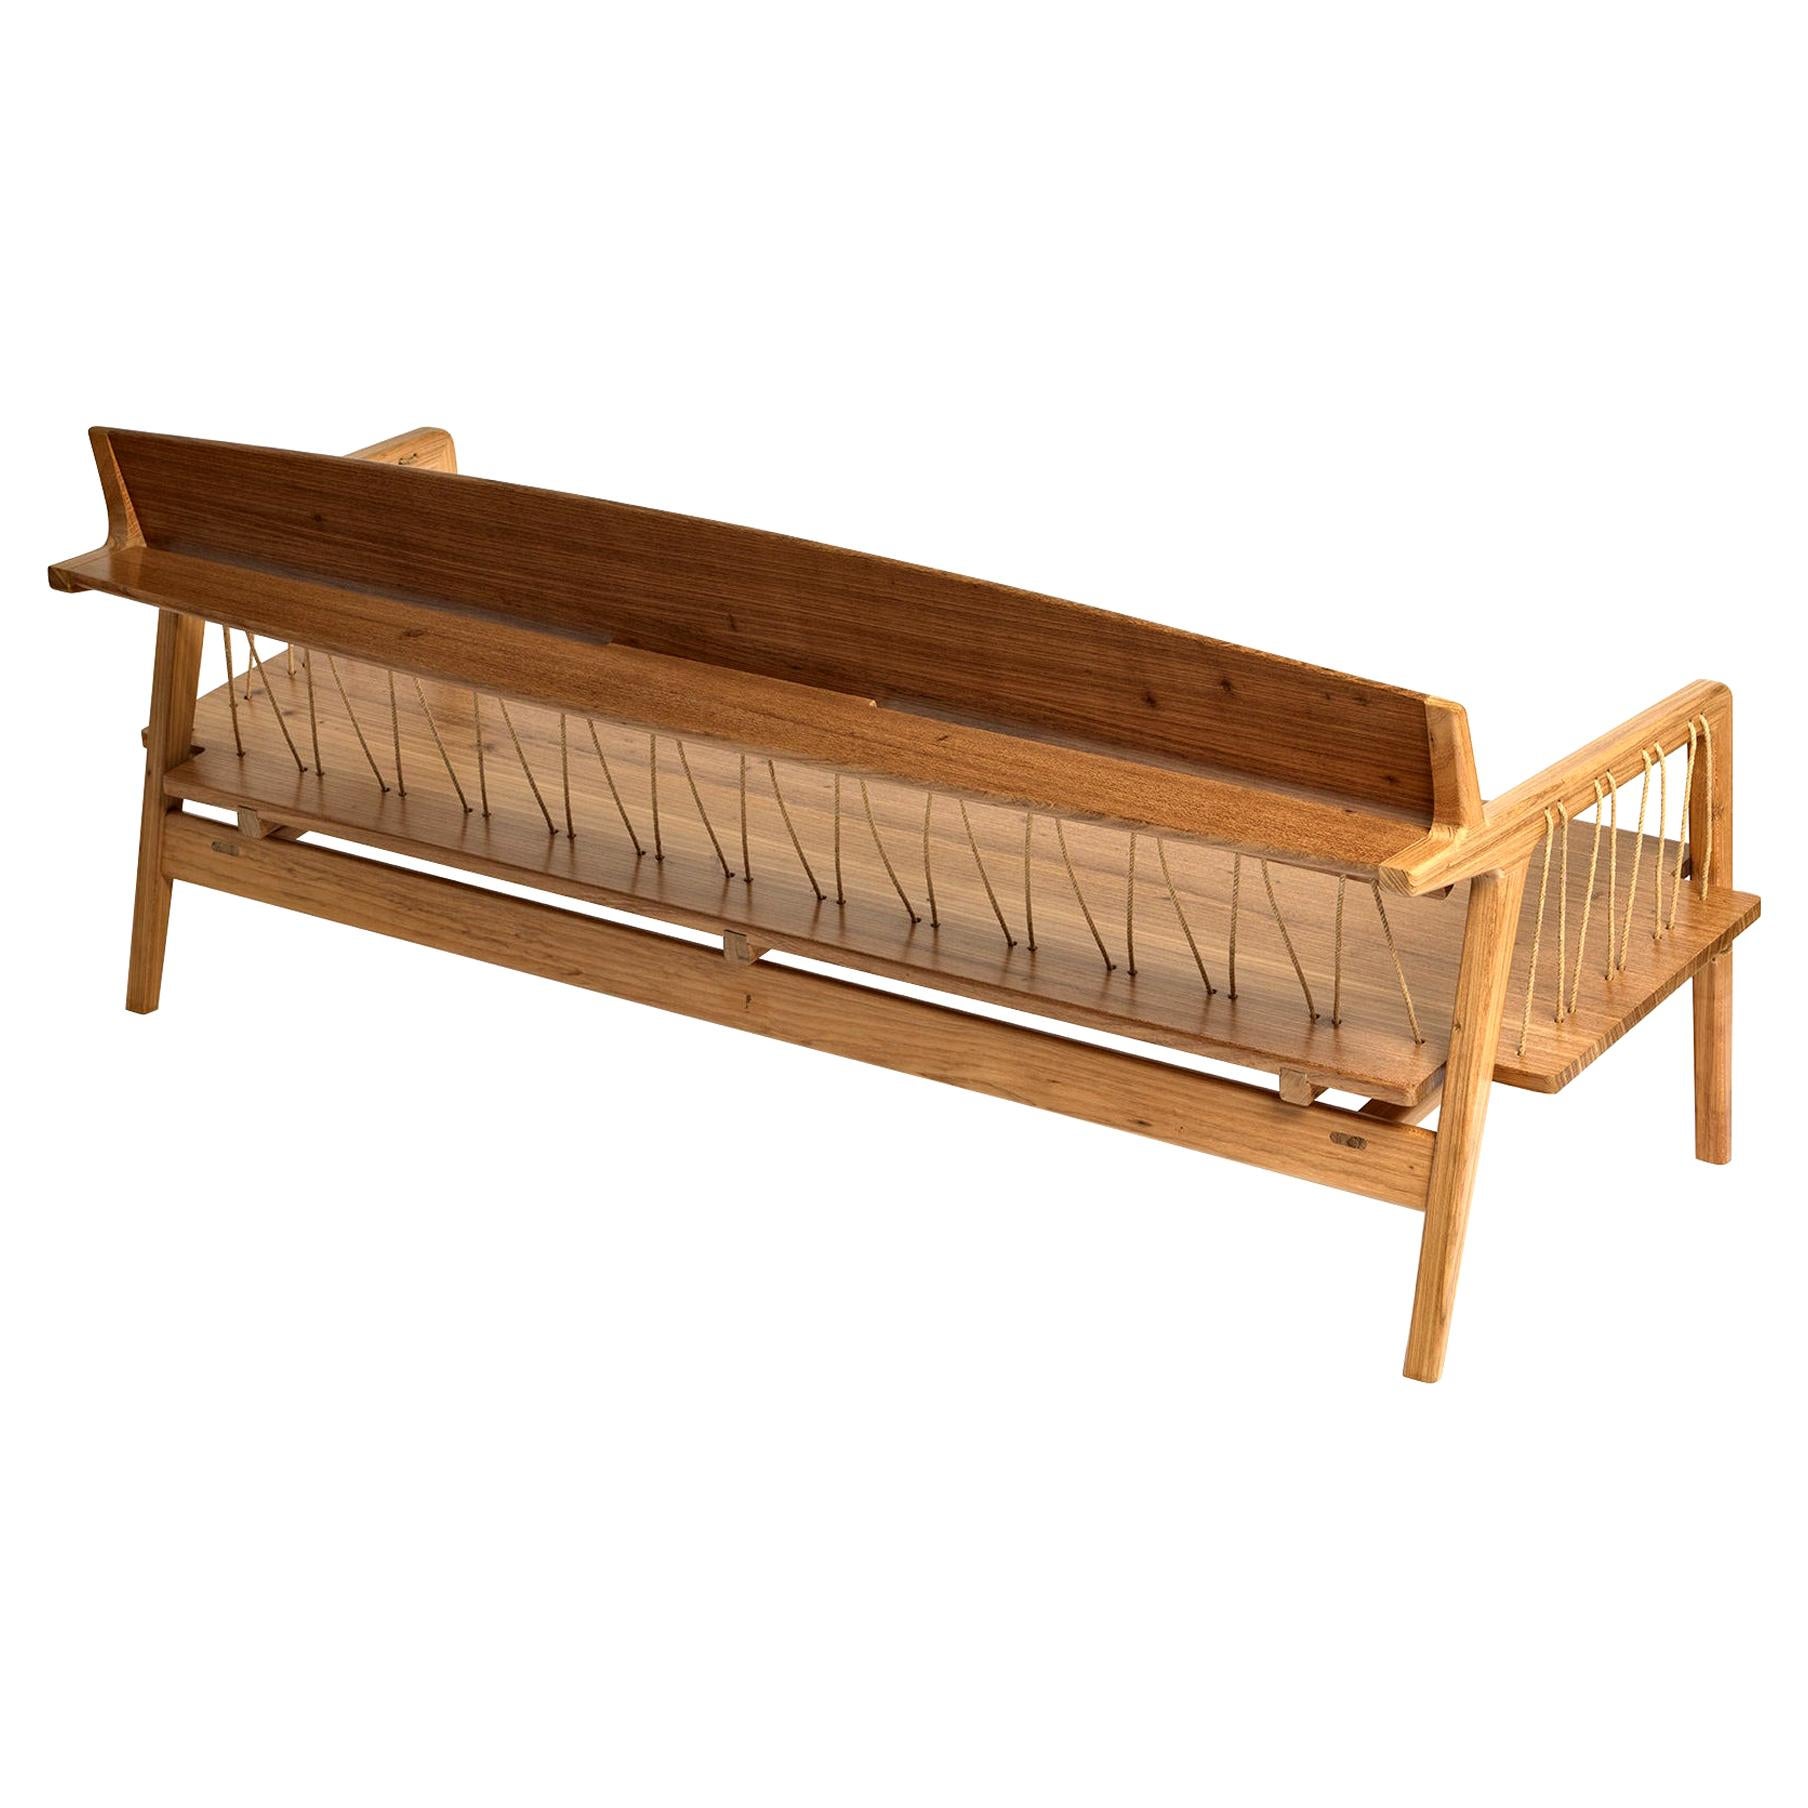 Bench in Tropical Hardwood and Cord by Ricardo Graham Ferreira